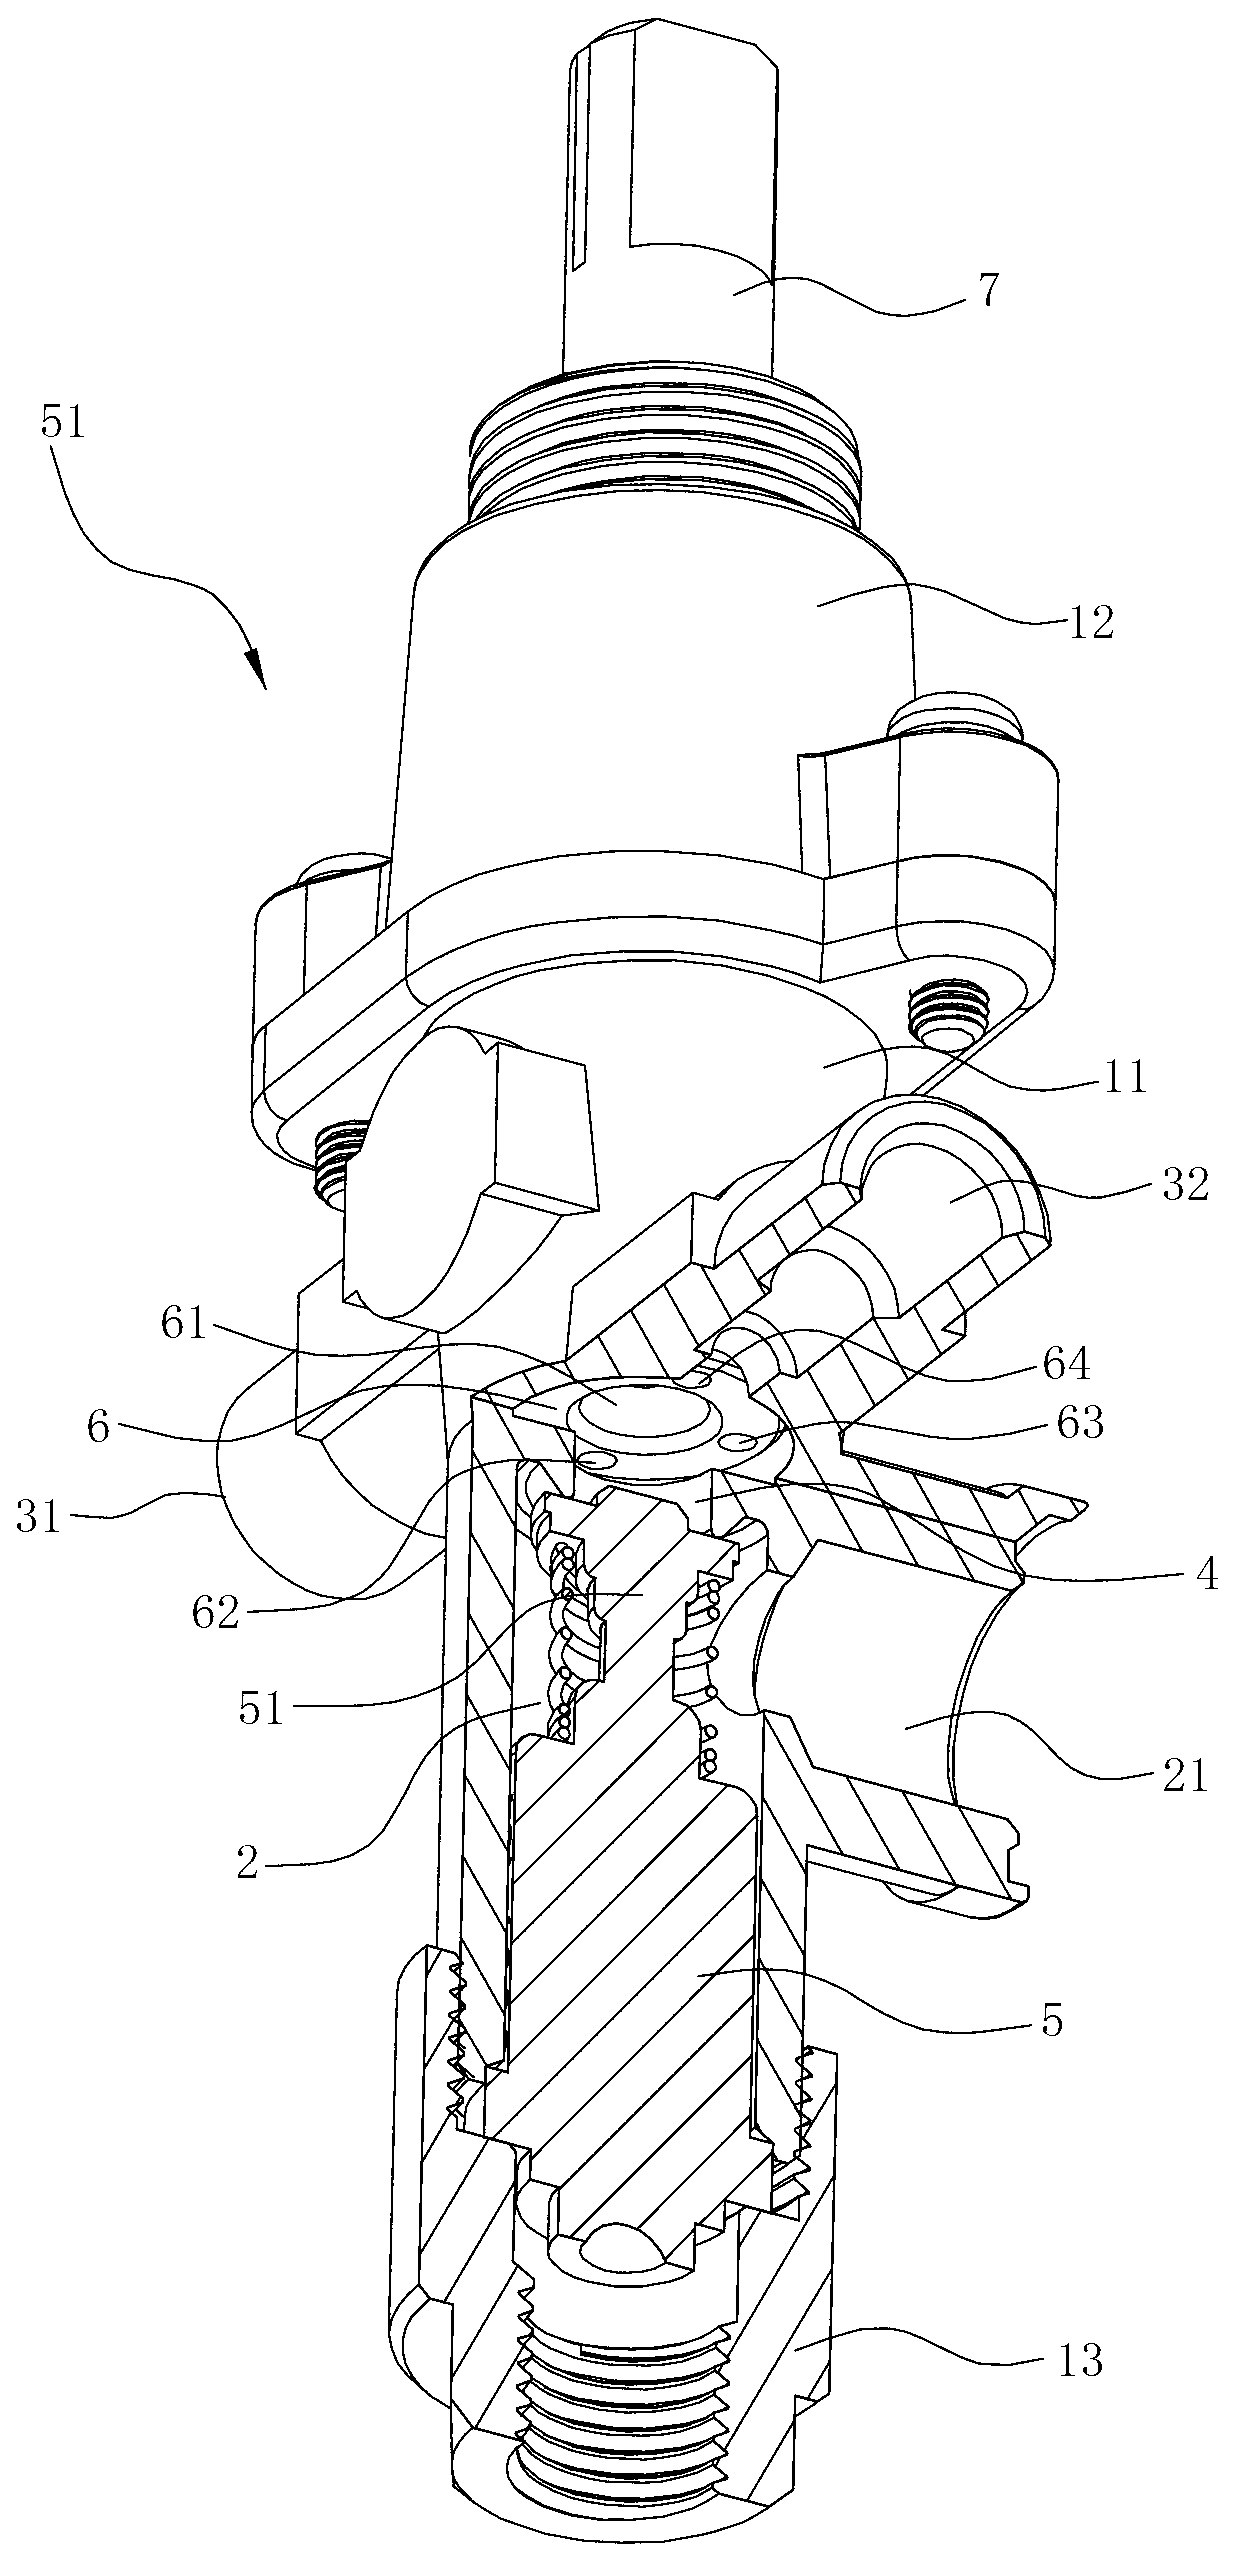 Fuel gas valve for assisting gas supply and ignition